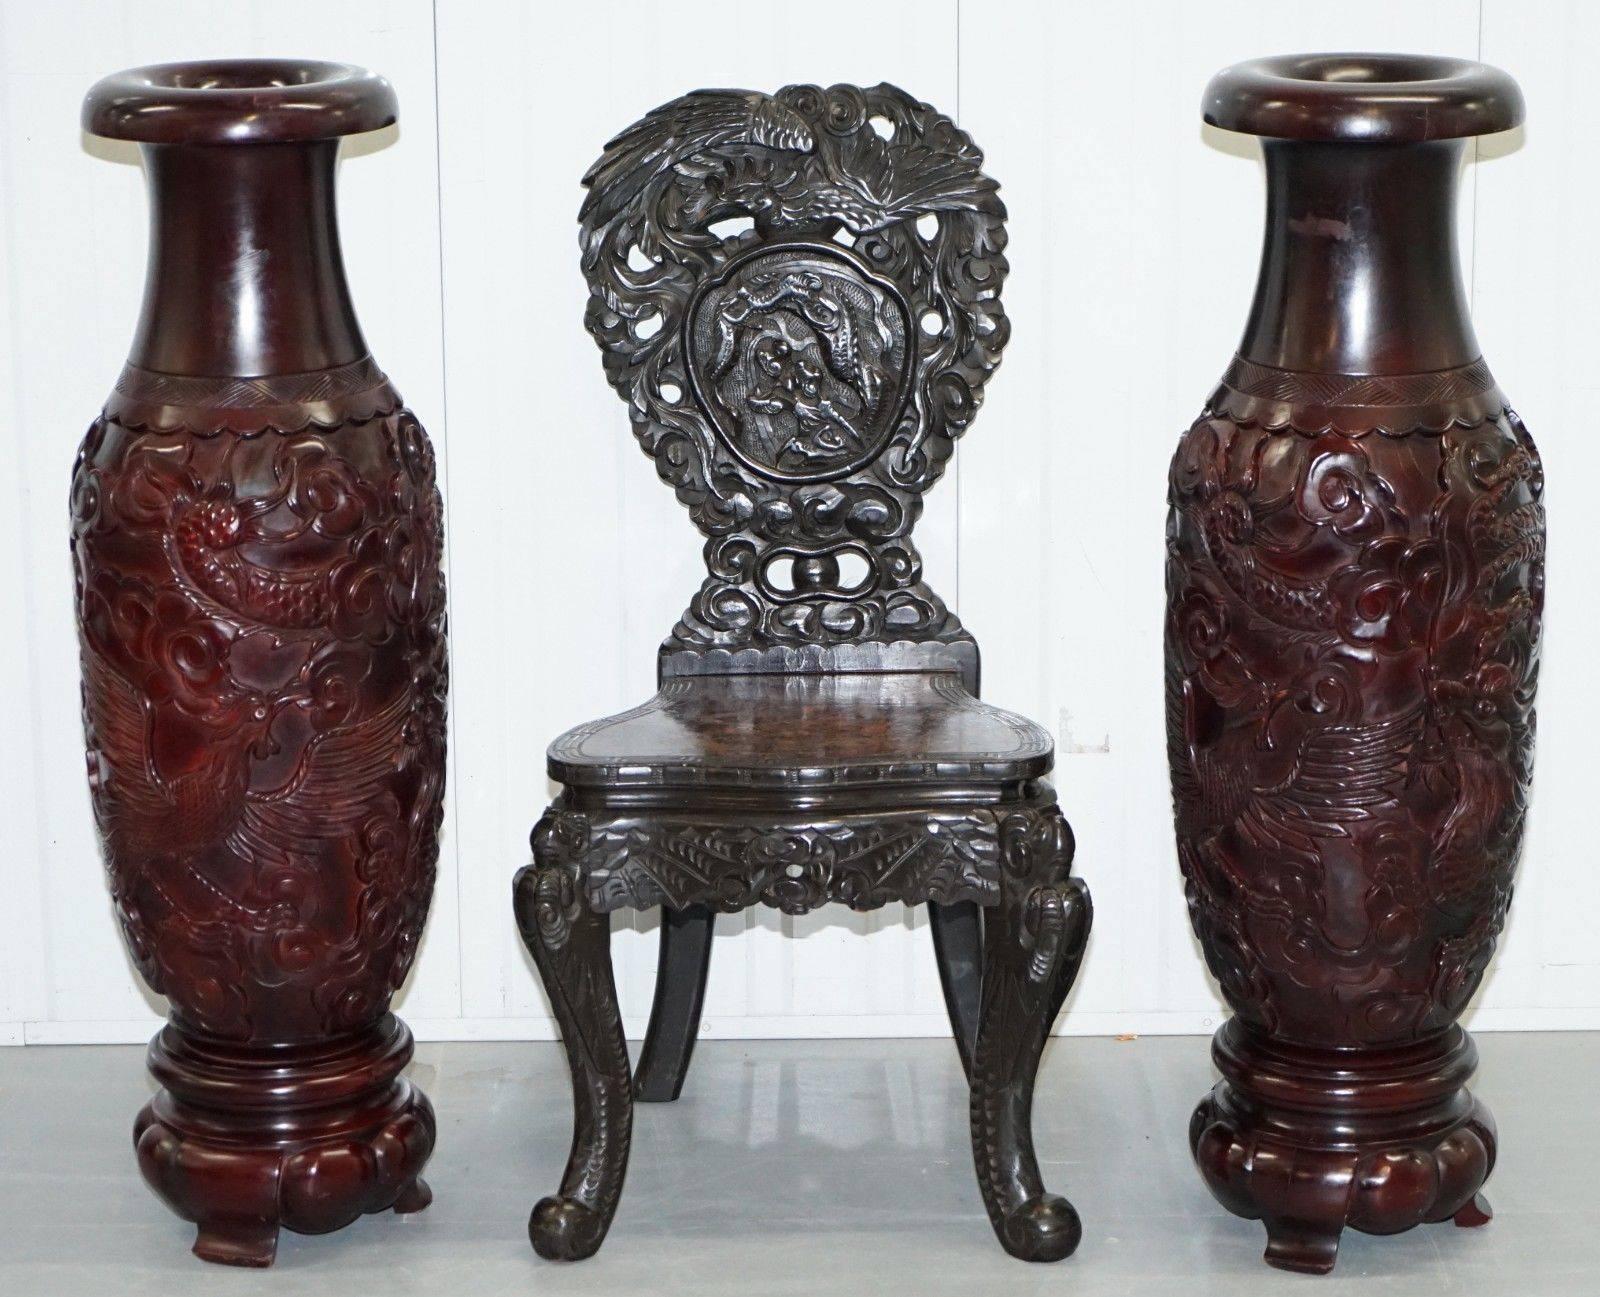 We are delighted to offer for sale this lovely hand-carved pair of Chinese Cinnabar vase’s depicting dragons birds and flowers.

A very good looking and well made pair, hand-carved from what looks like solid teak and then layered and layered with